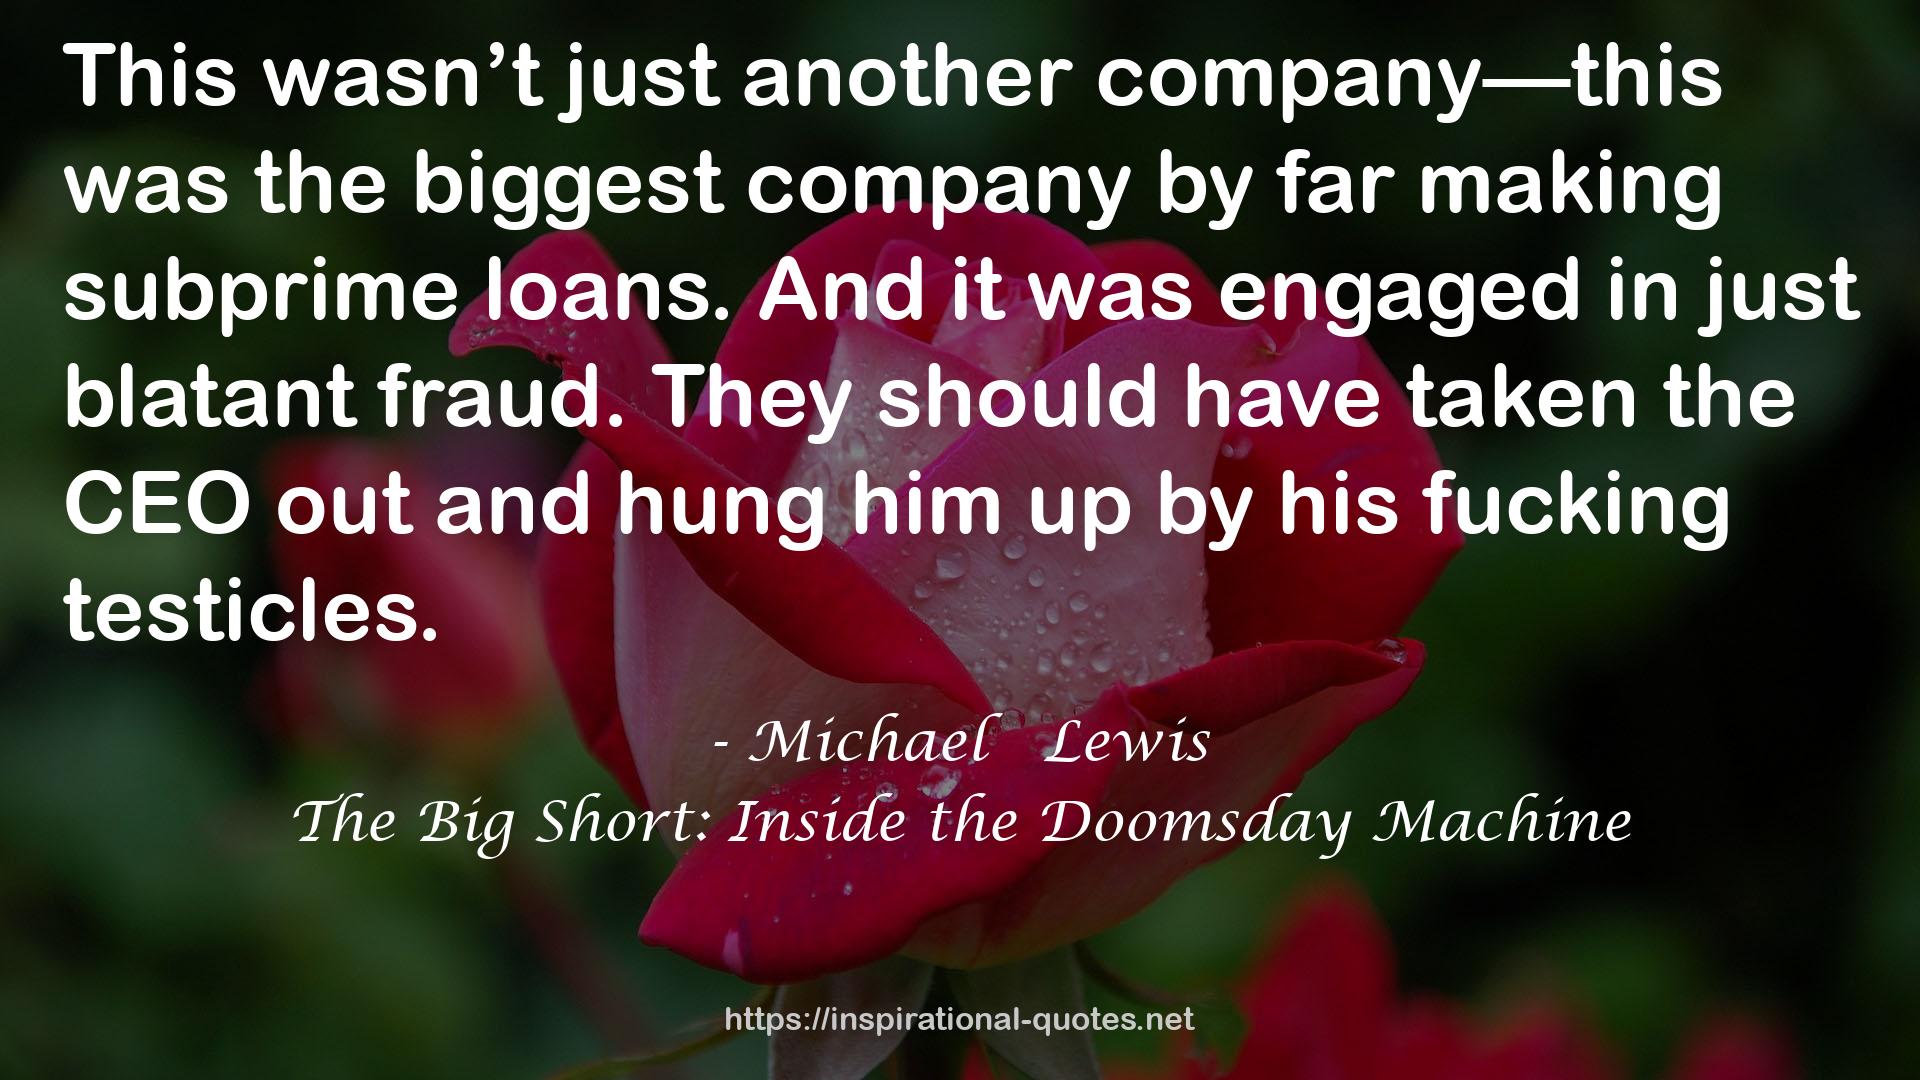 The Big Short: Inside the Doomsday Machine QUOTES